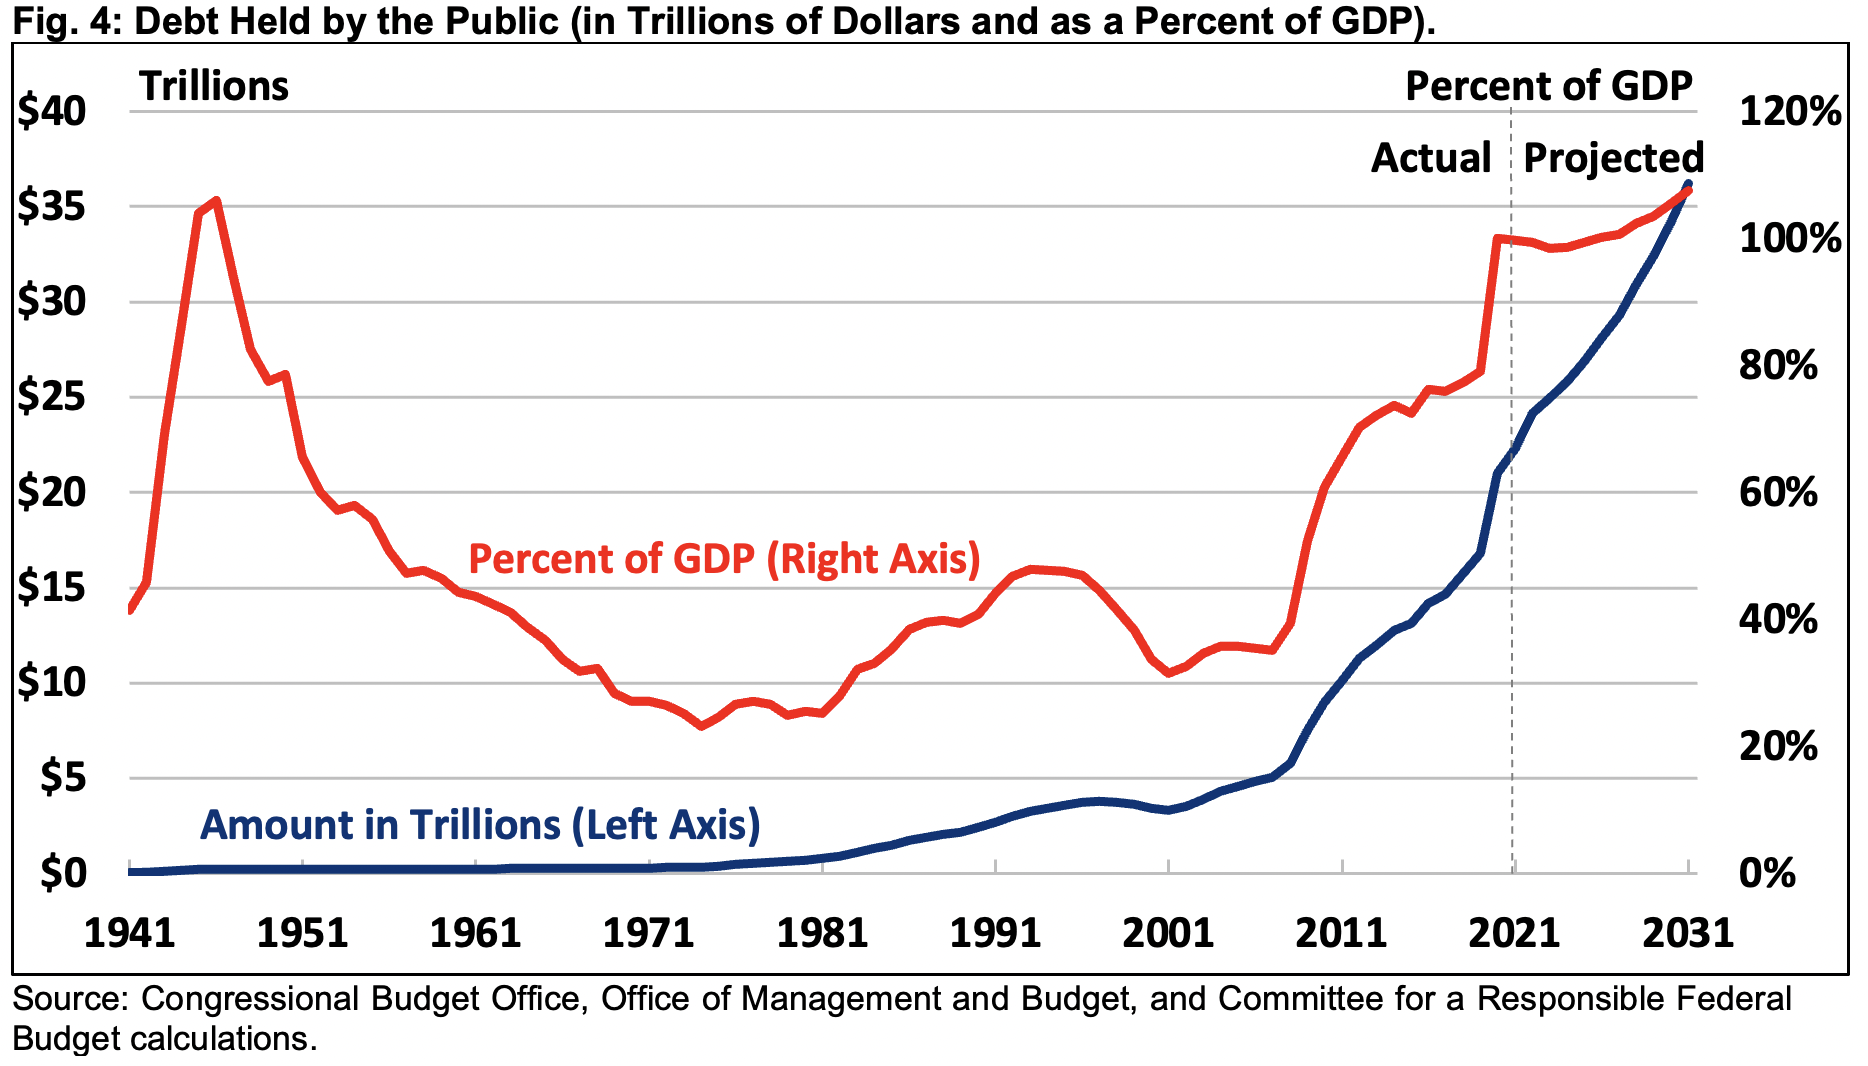 Debt Held by the Public in Trillions of Dollars and as a Percent of GDP. 